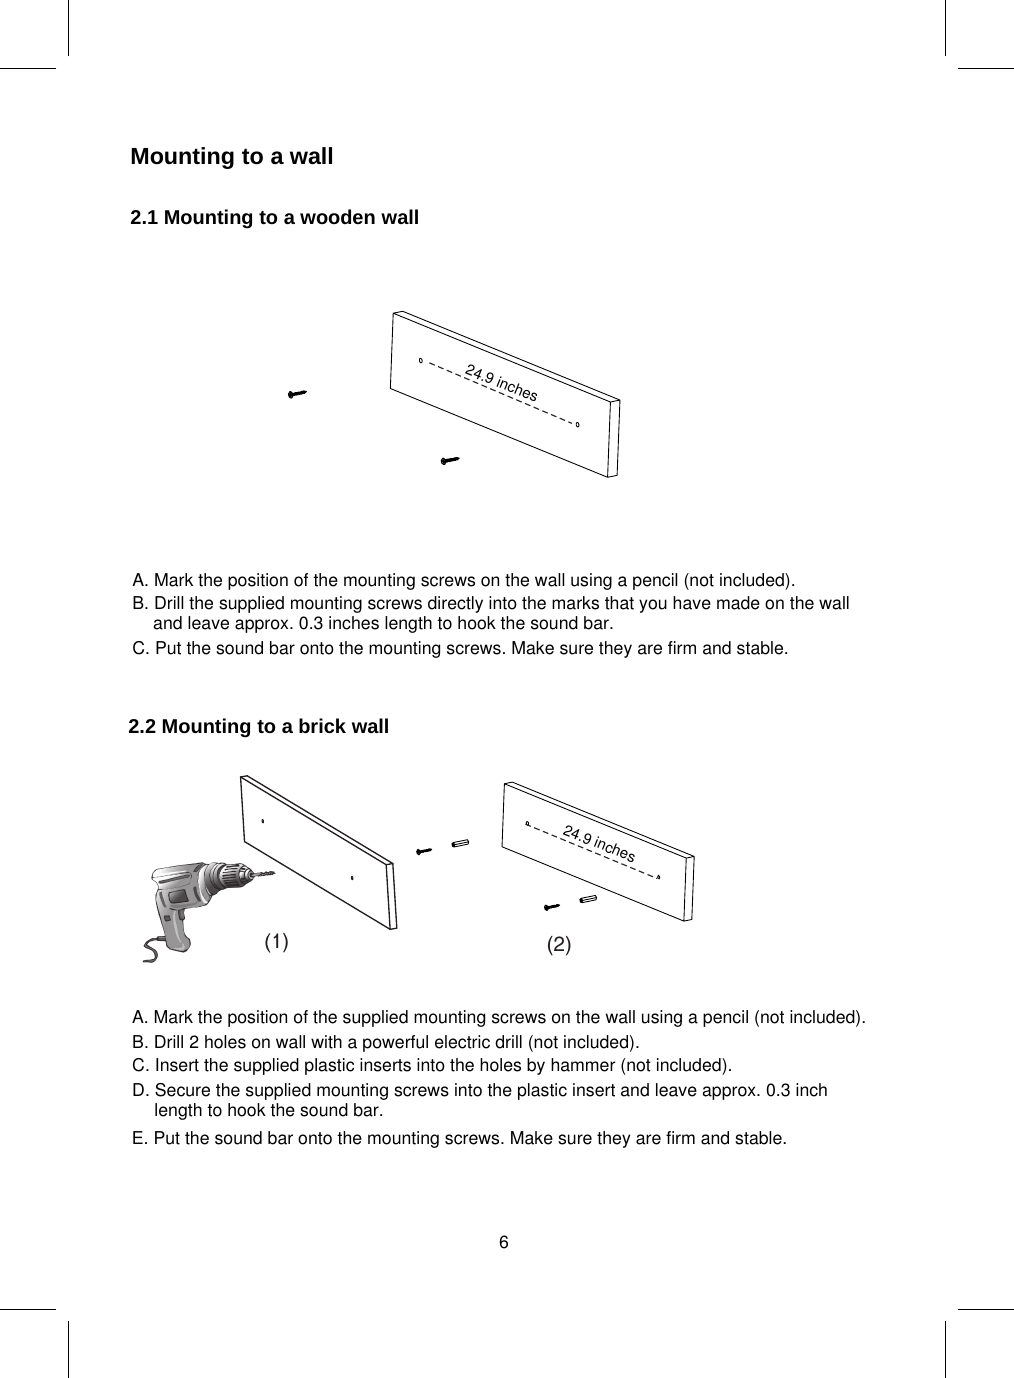 Mounting to a wall2.1 Mountingto a wooden wall2.2 Mountingto a brick wall(1) (2)24.9 inches24.9 inches6A. Mark the position of the mounting screws on the wall using a pencil (not included).B. Drill the supplied mounting screws directly into the marks that you have made on the walland leave approx. 0.3 inches length to hook the sound bar.C. Put the sound bar onto the mounting screws. Make sure they are firm and stable.A. Mark the position of the supplied mounting screws on the wall using a pencil (not included).E. Put the sound bar onto the mounting screws. Make sure they are firm and stable.B. Drill 2 holes on wall with a powerful electric drill (not included).C. Insert the supplied plastic inserts into the holes by hammer (not included).D. Secure the supplied mounting screws into the plastic insert and leave approx. 0.3 inchlength to hook the sound bar.